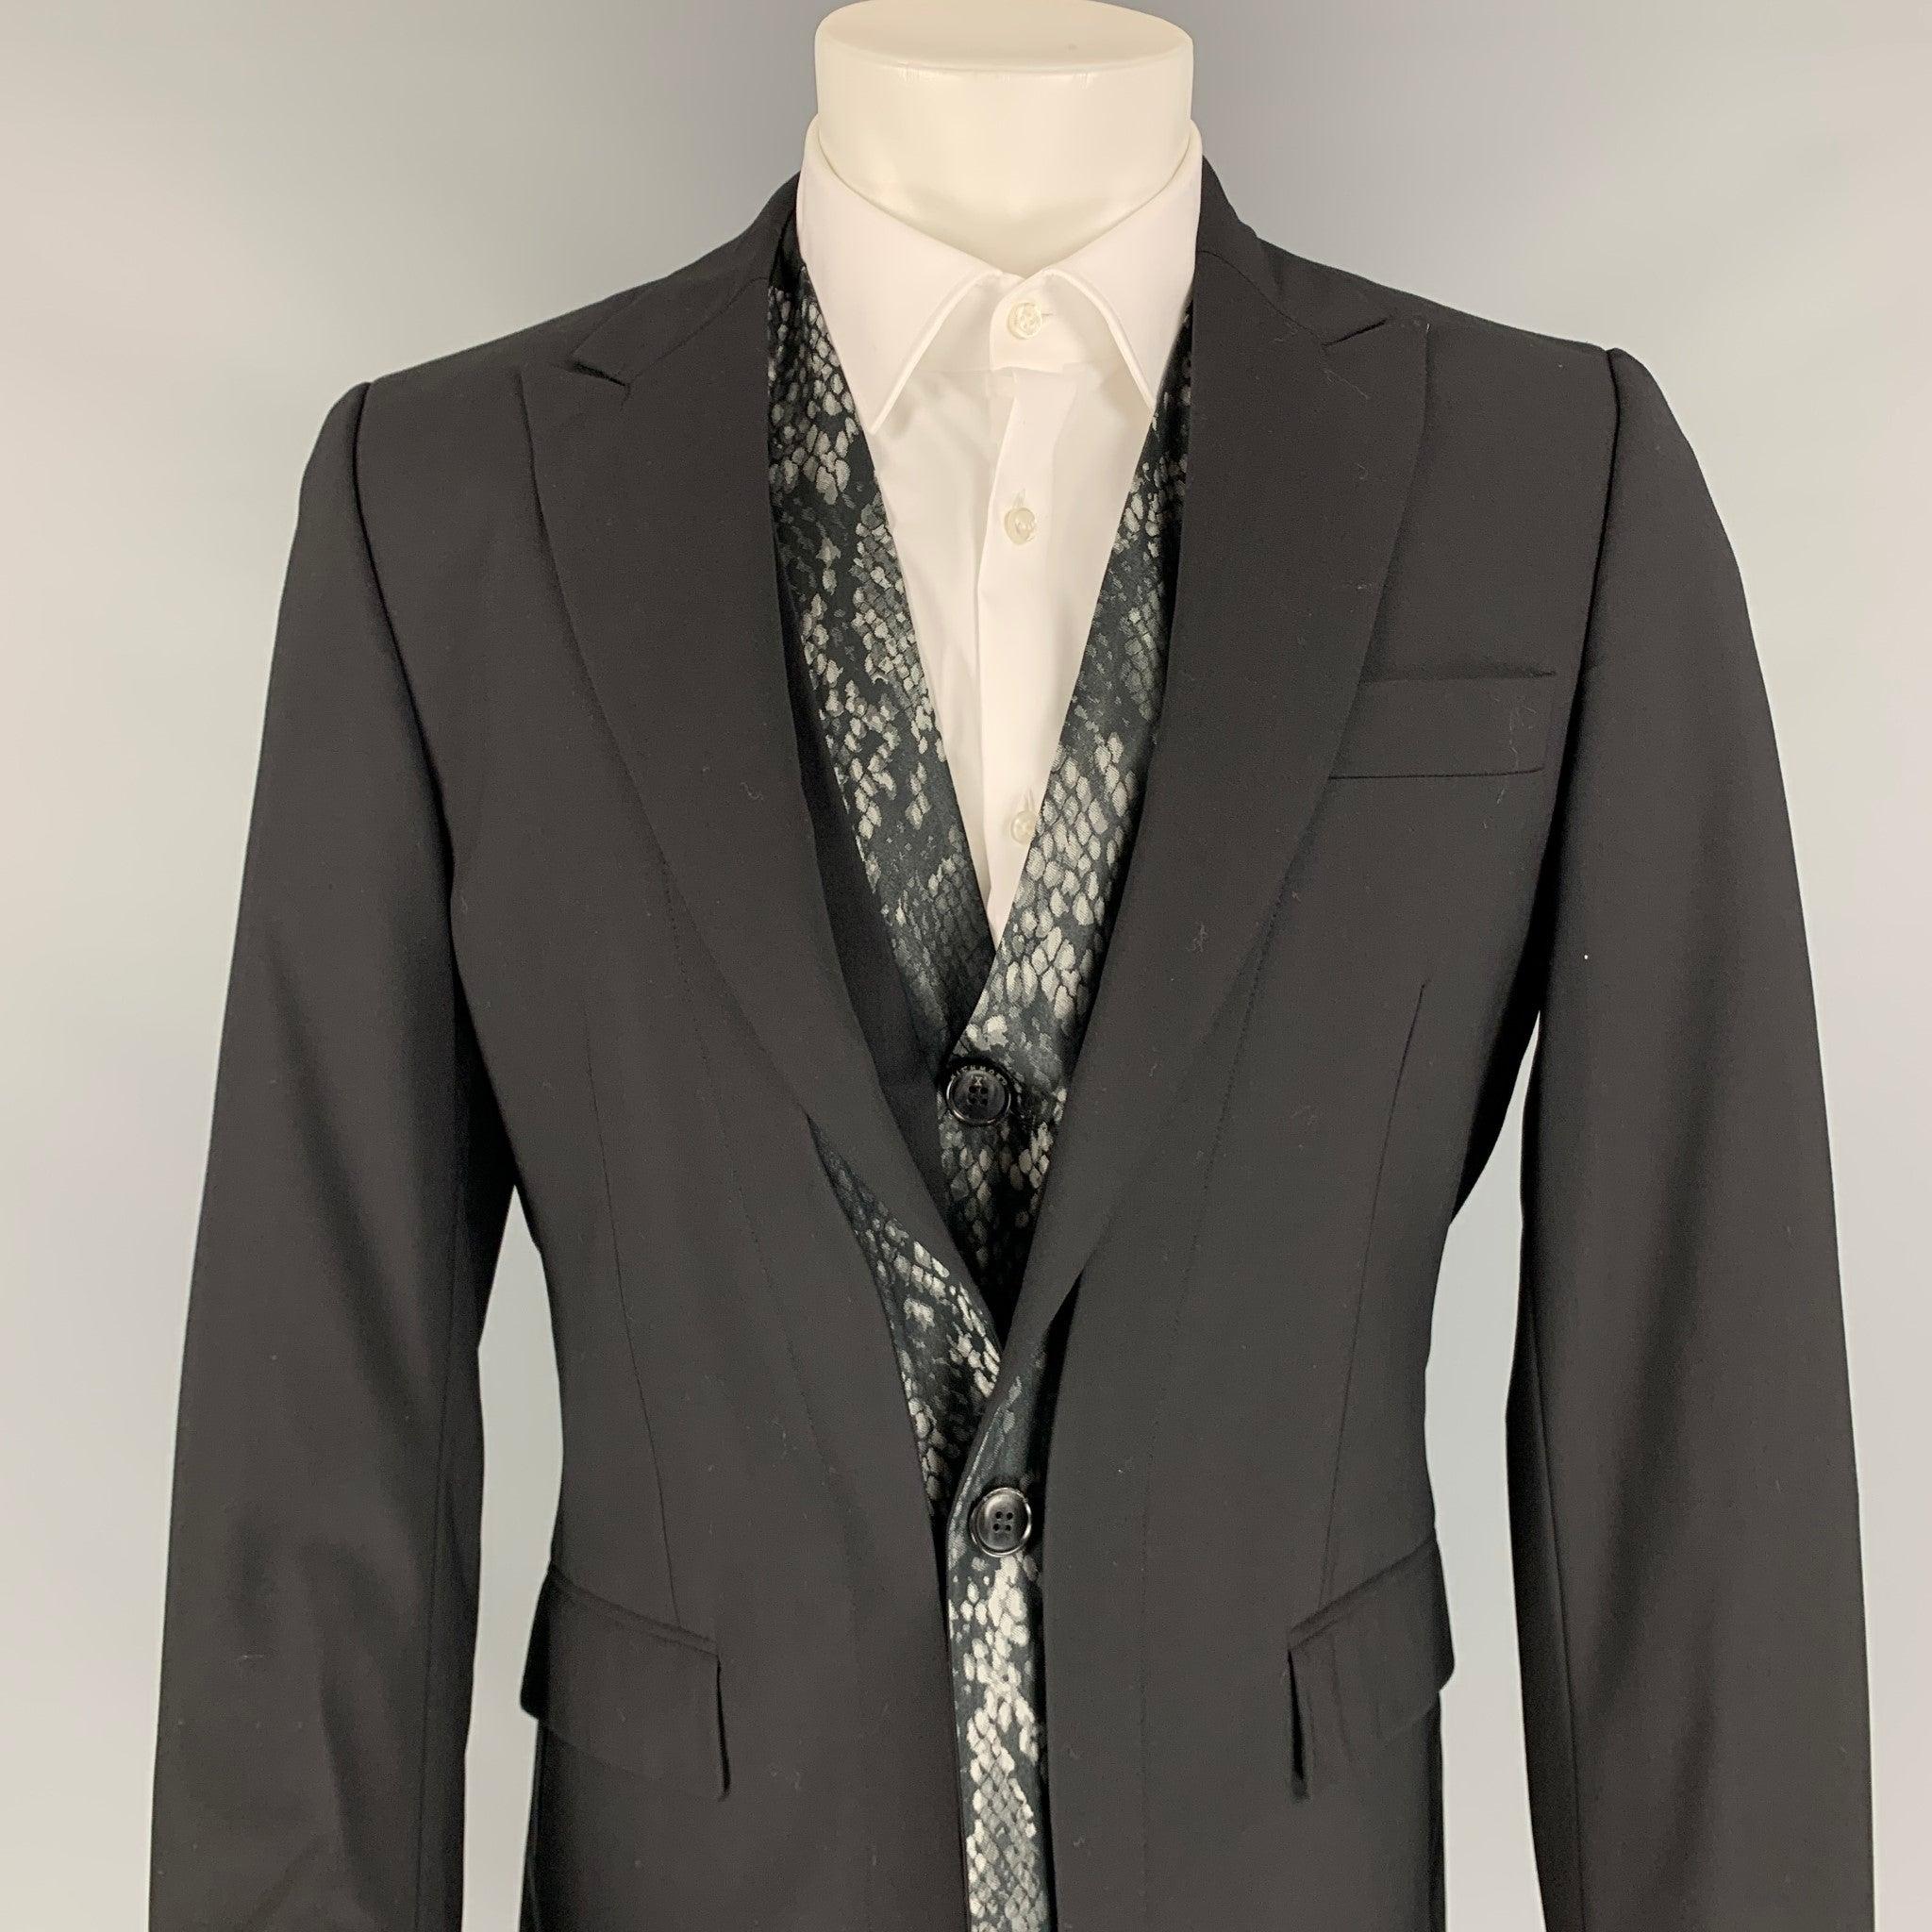 JOHN RICHMOND 2 Piece sport coat comes in a black wool with a full liner featuring a peak lapel, flap pockets, single button closure, and a matching vest. Made in Italy.
Very Good
Pre-Owned Condition. 

Marked:   48 

Measurements: 
 
Shoulder: 17